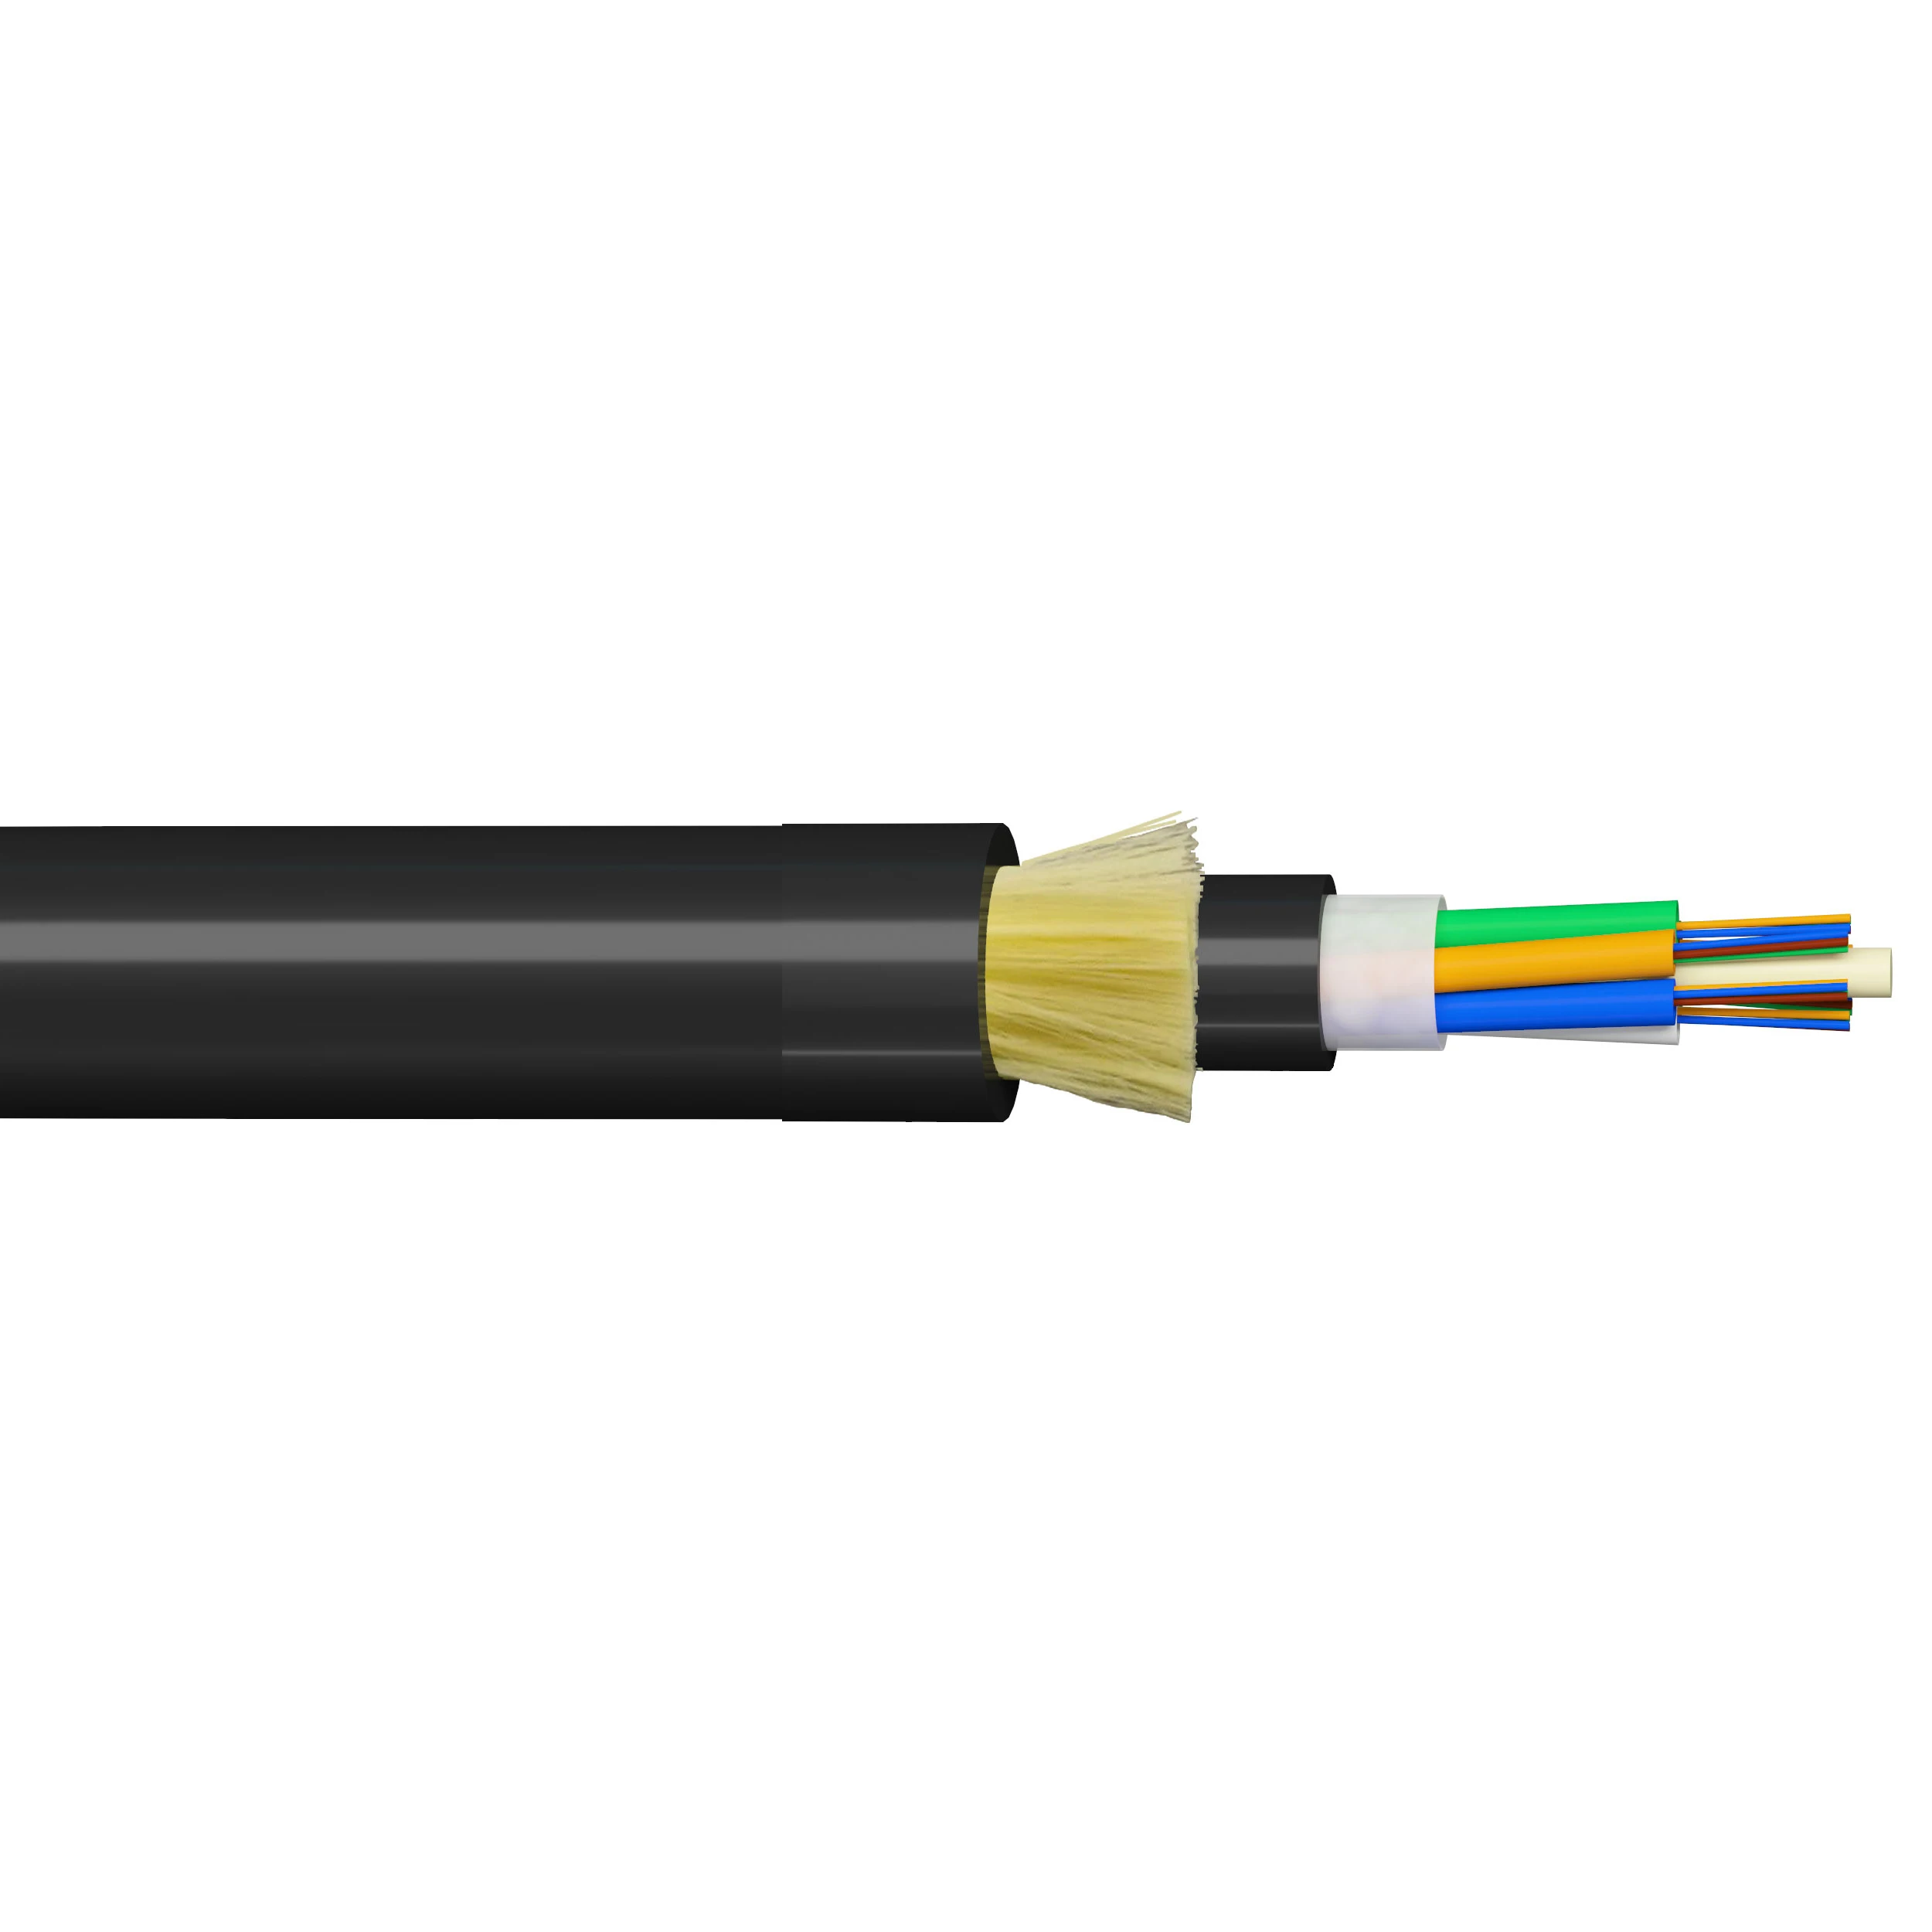 ADSS 24 Cores Fiber Optic Cables SM Fiber G652D/B1.3 Double Jackets Underground and Direct Burial FO Cable Span 100 for Cabling (1600140366355)